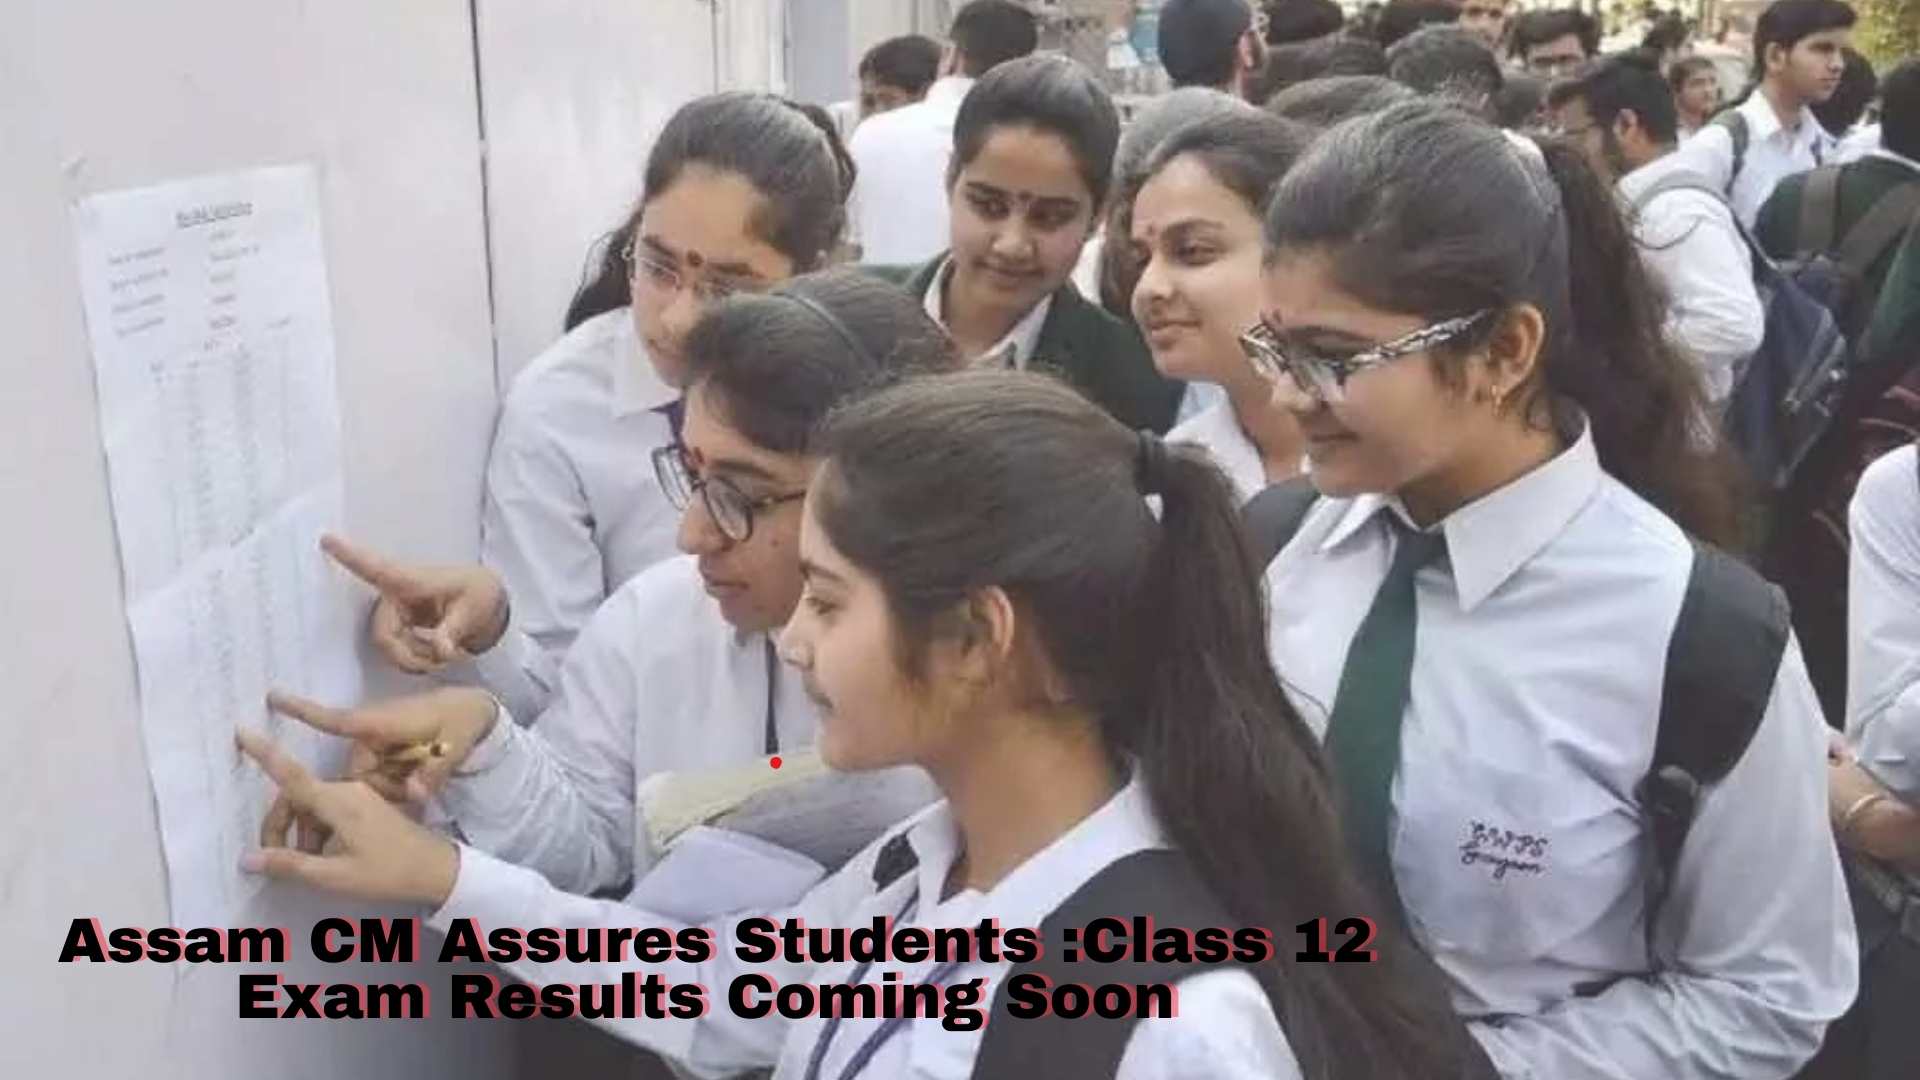 12 result to be declared